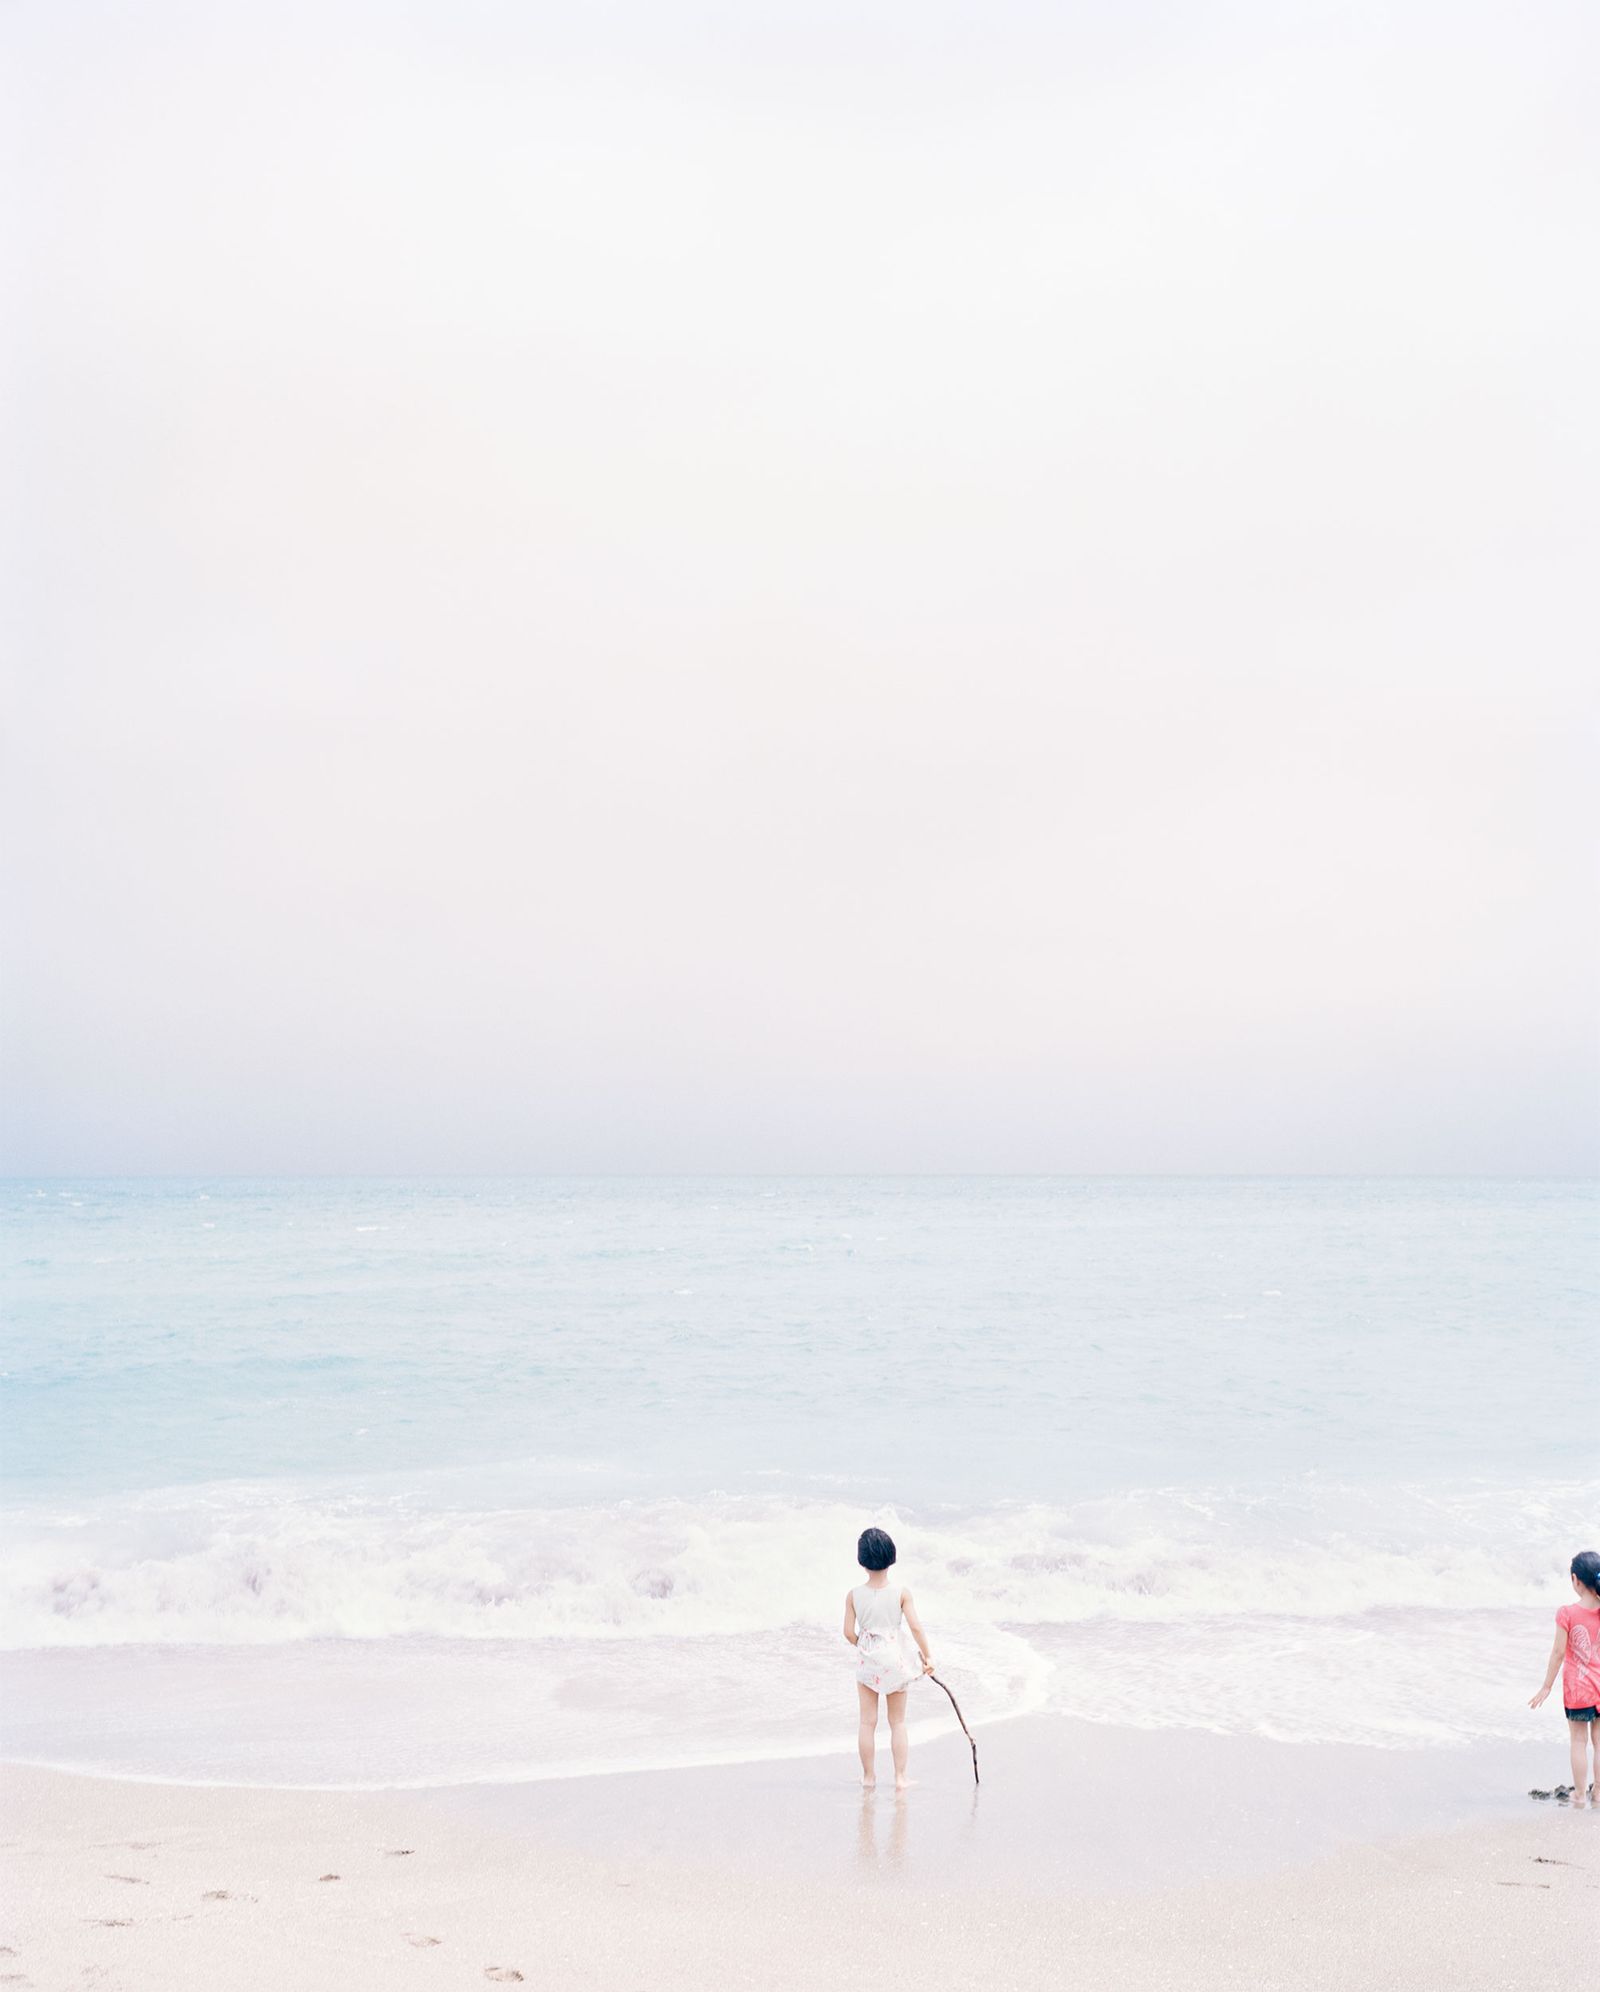 © Florian Bong-kil Grosse - Image from the Hanguk photography project